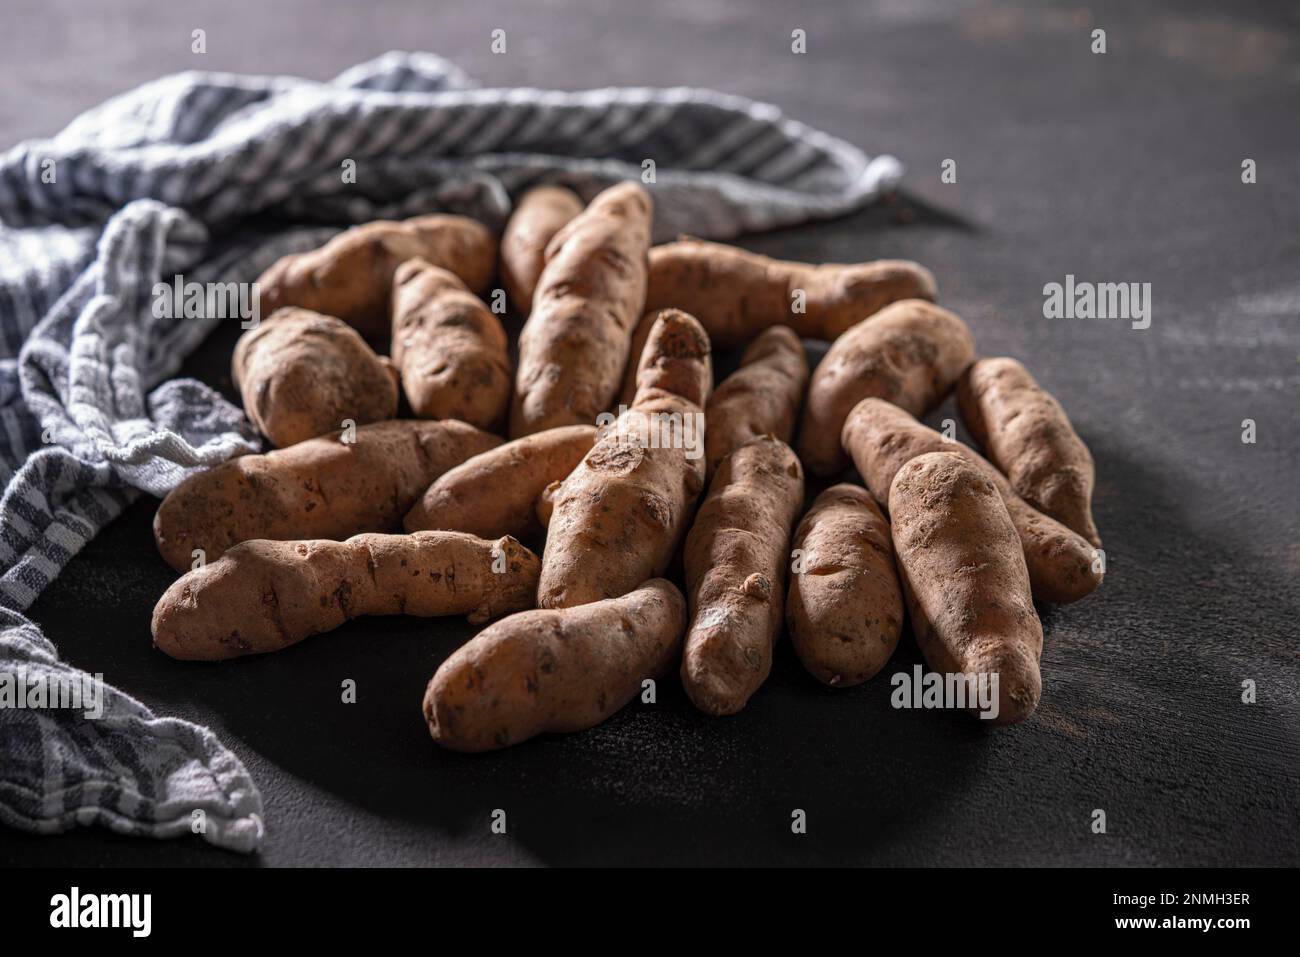 Bamberger Hoernla, also Bamberger Hoernchen, an old potato variety from Franconia, potato, with tea towel, food photography Stock Photo